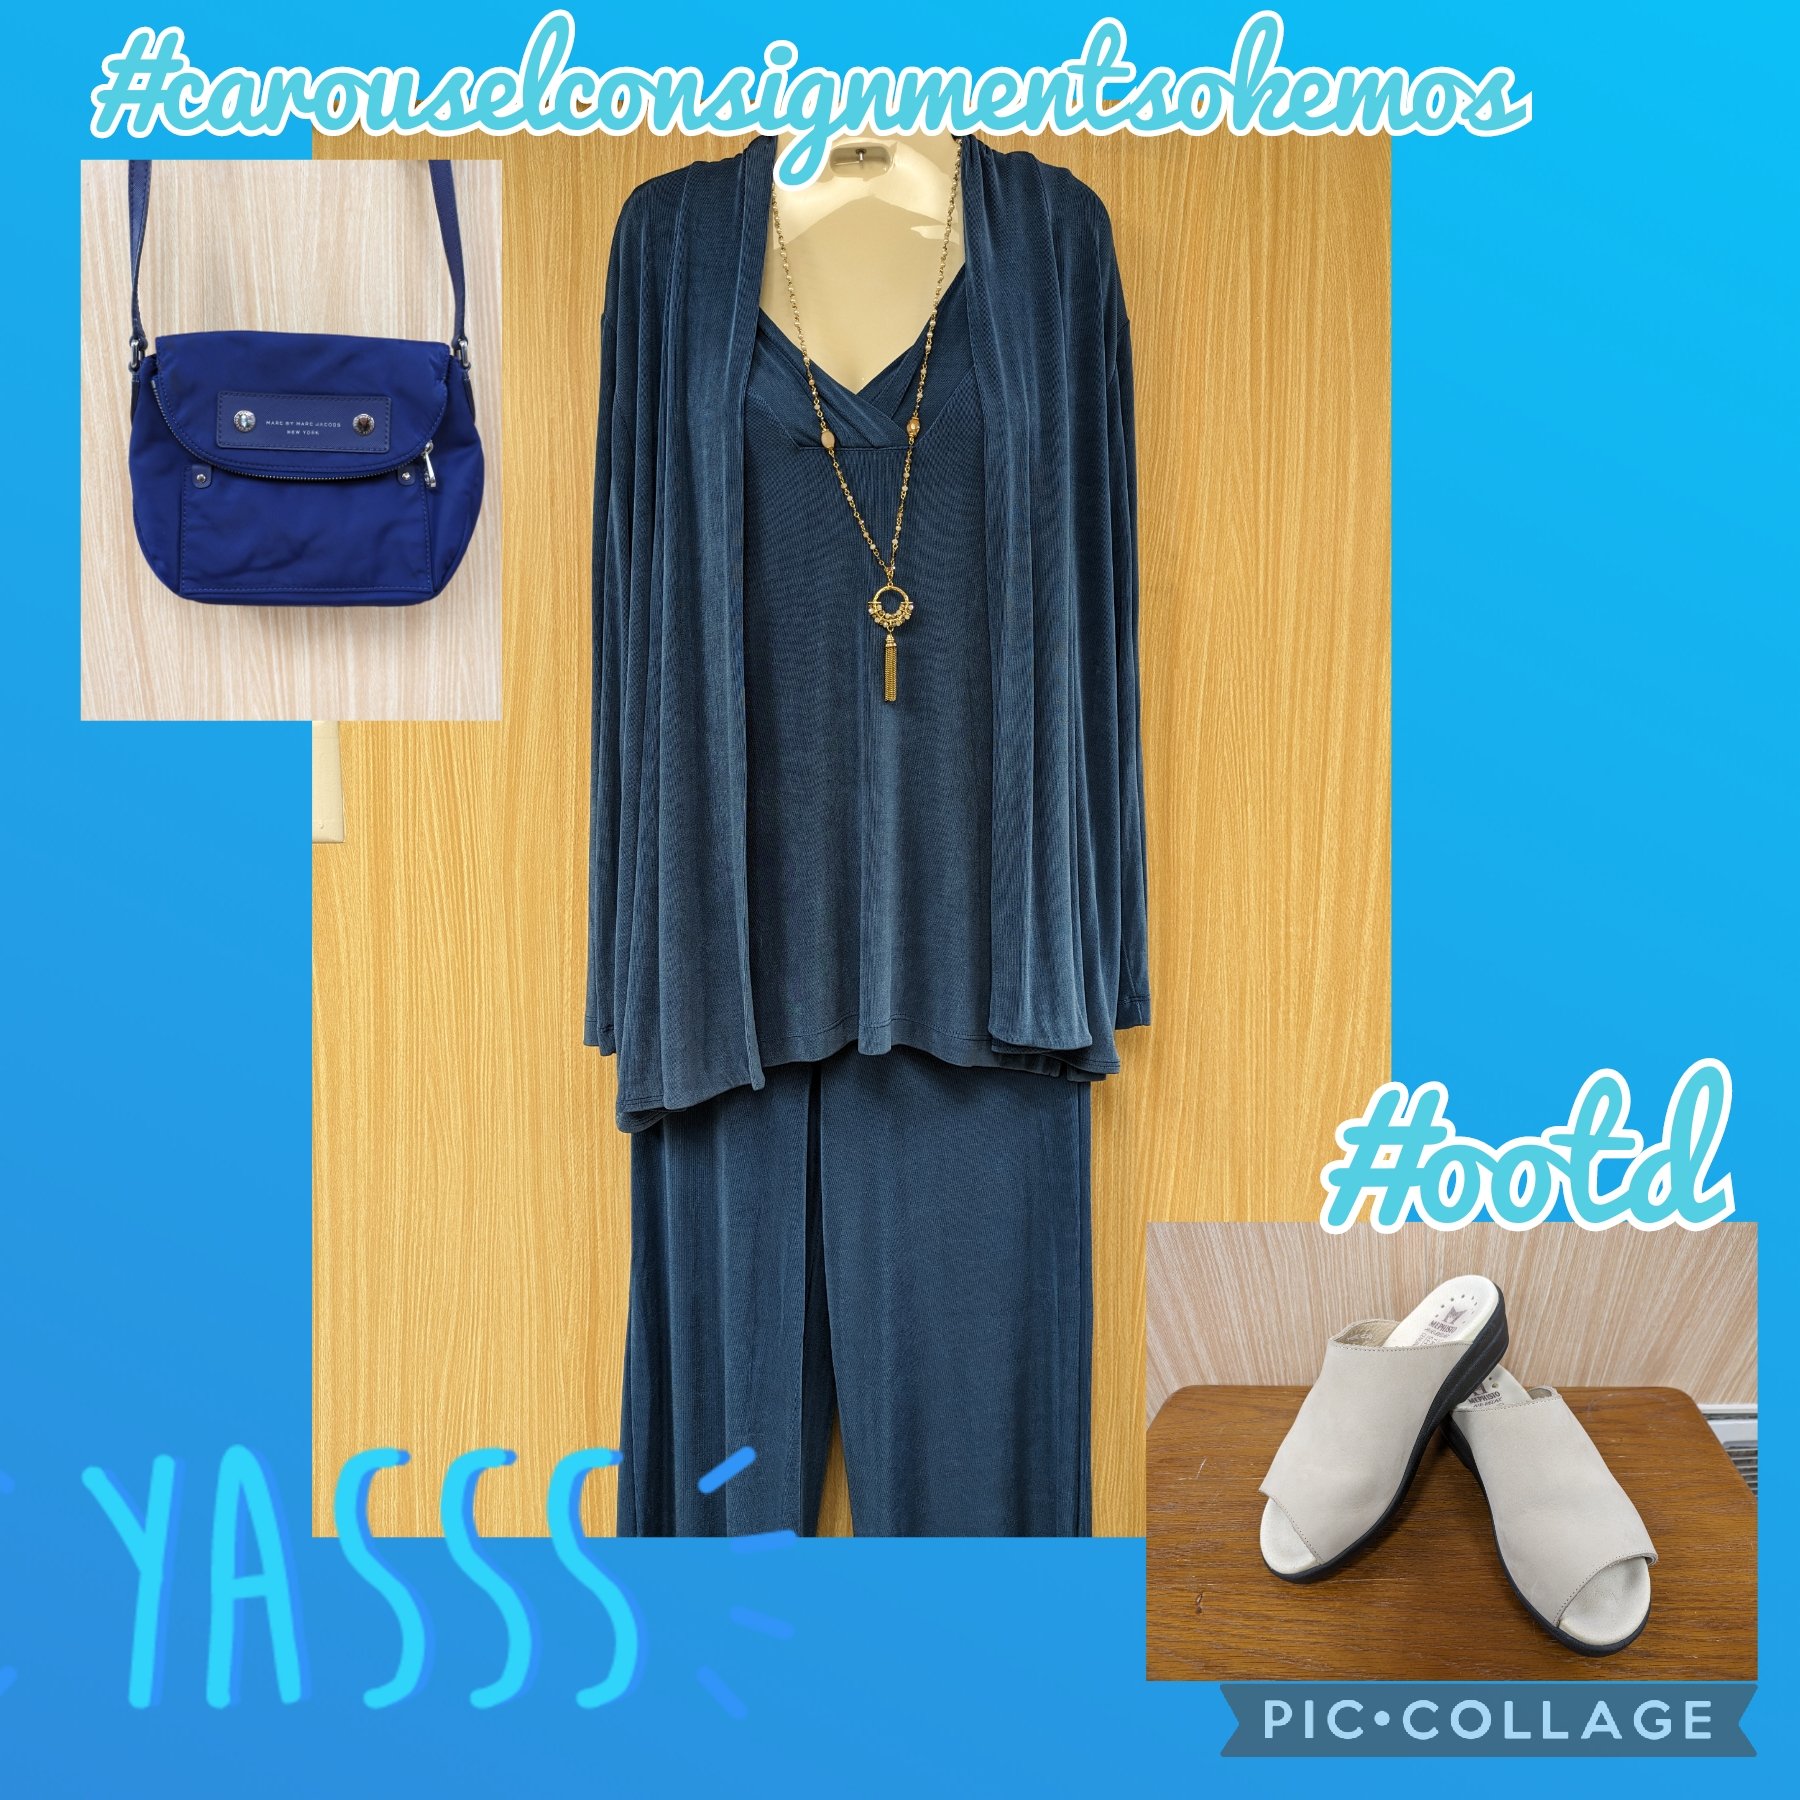 💙Chico's Travelers Set💙
Chico's 3 Piece Set Size Medium $64
Necklace $10
Mephisto Sandals Size 8.5 $46
Marc Jacobs Crossbody $54
#carouselconsignmentsokemos #shoplocal #shopsmall #shopsmallbusiness #resalenotretail #shopconsignment #shopsecondhand 